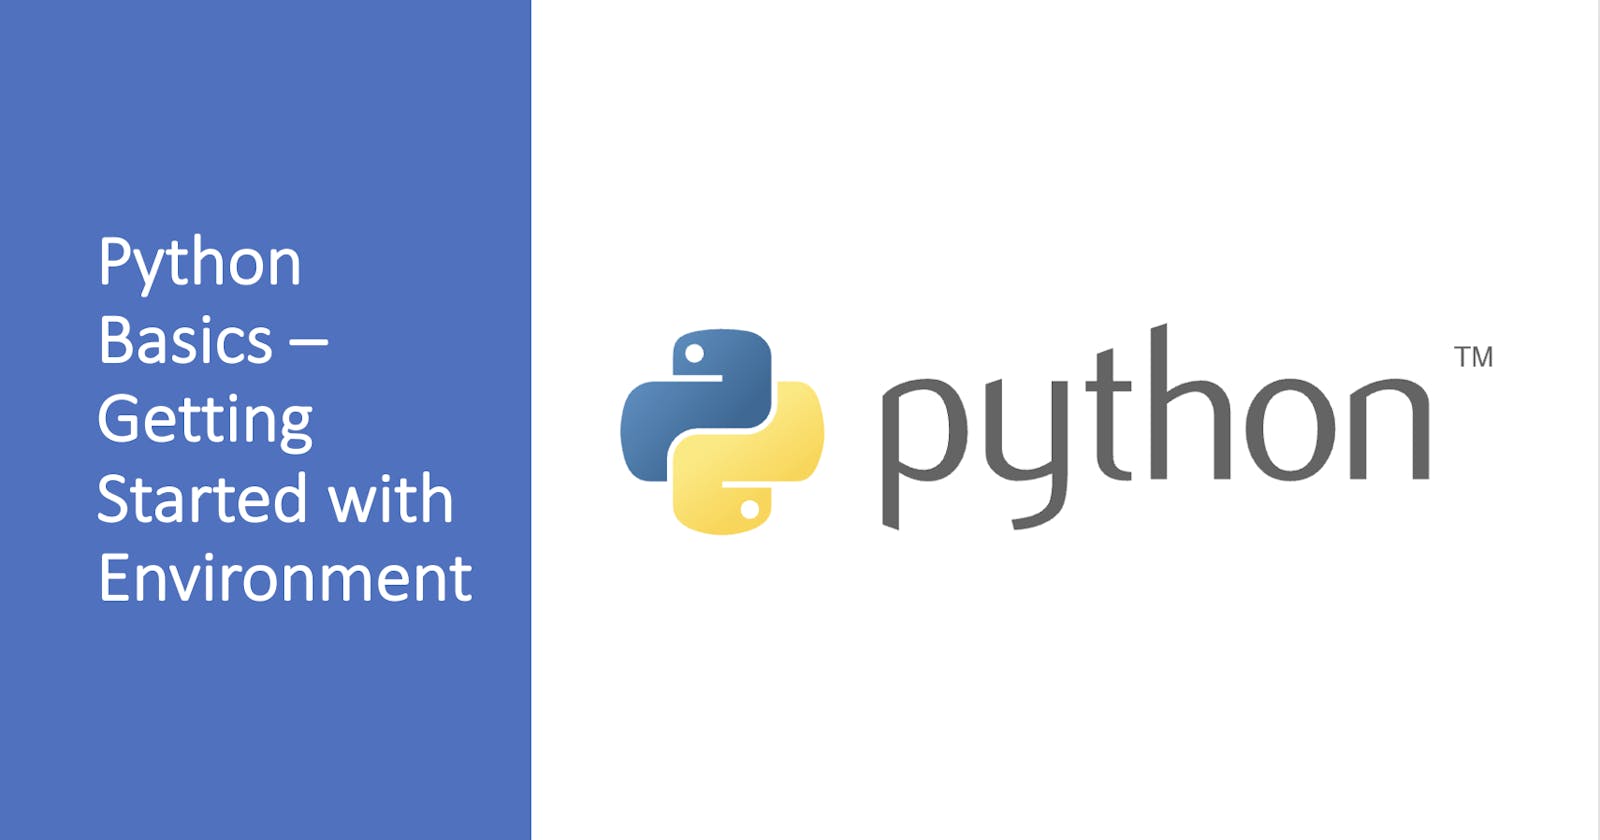 Python Basics - Getting Started with Environment